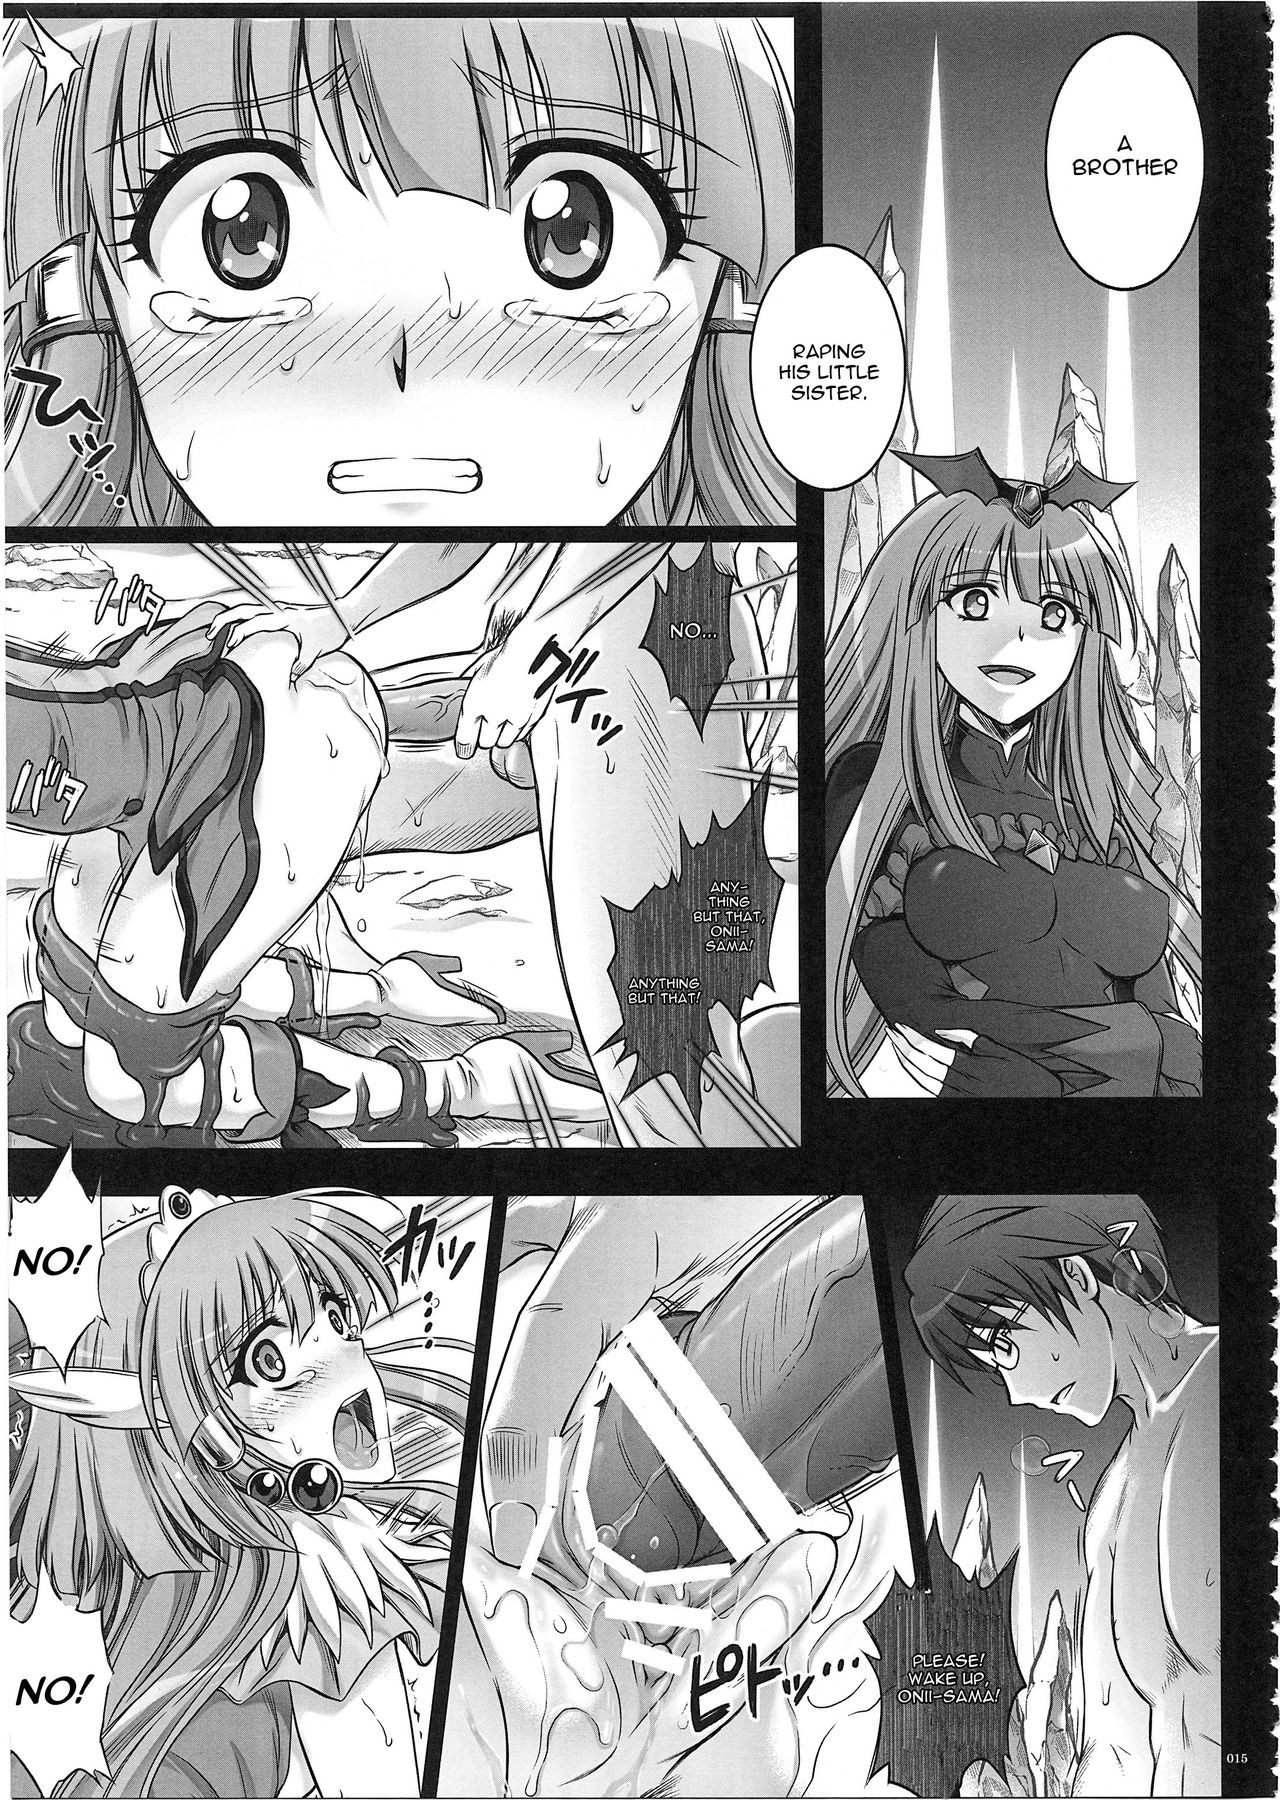 (COMIC1☆7) [Cyclone (Izumi)] Situation Note 1003 VS Badend Beauty (Smile Precure!) [English] [CGrascal] 